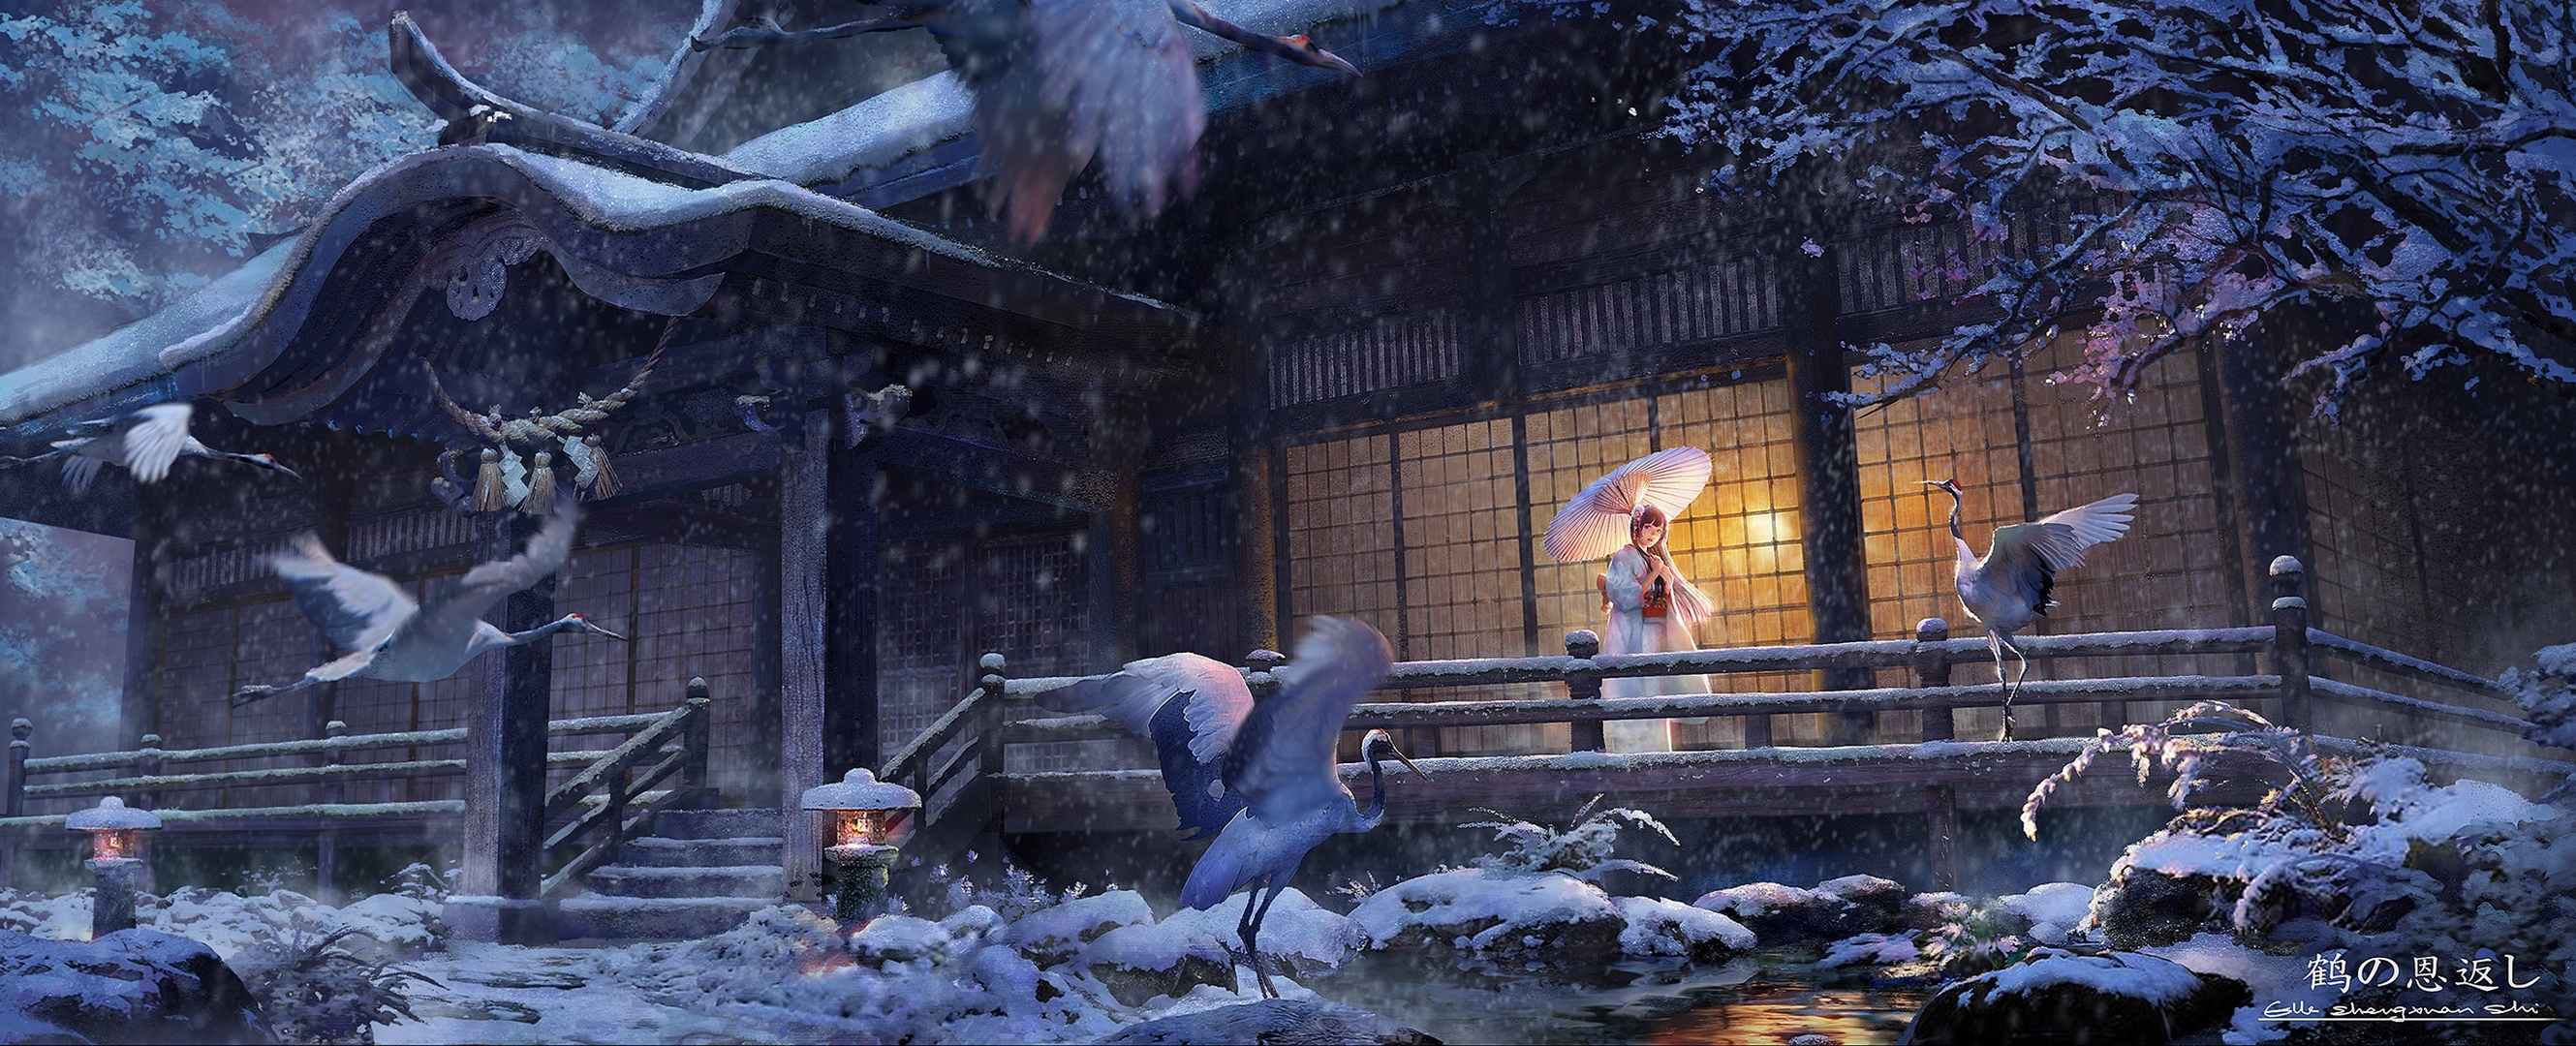 Anime 2659x1080 anime anime girls original characters artwork Lost Elle snow Asian architecture Japanese clothes birds